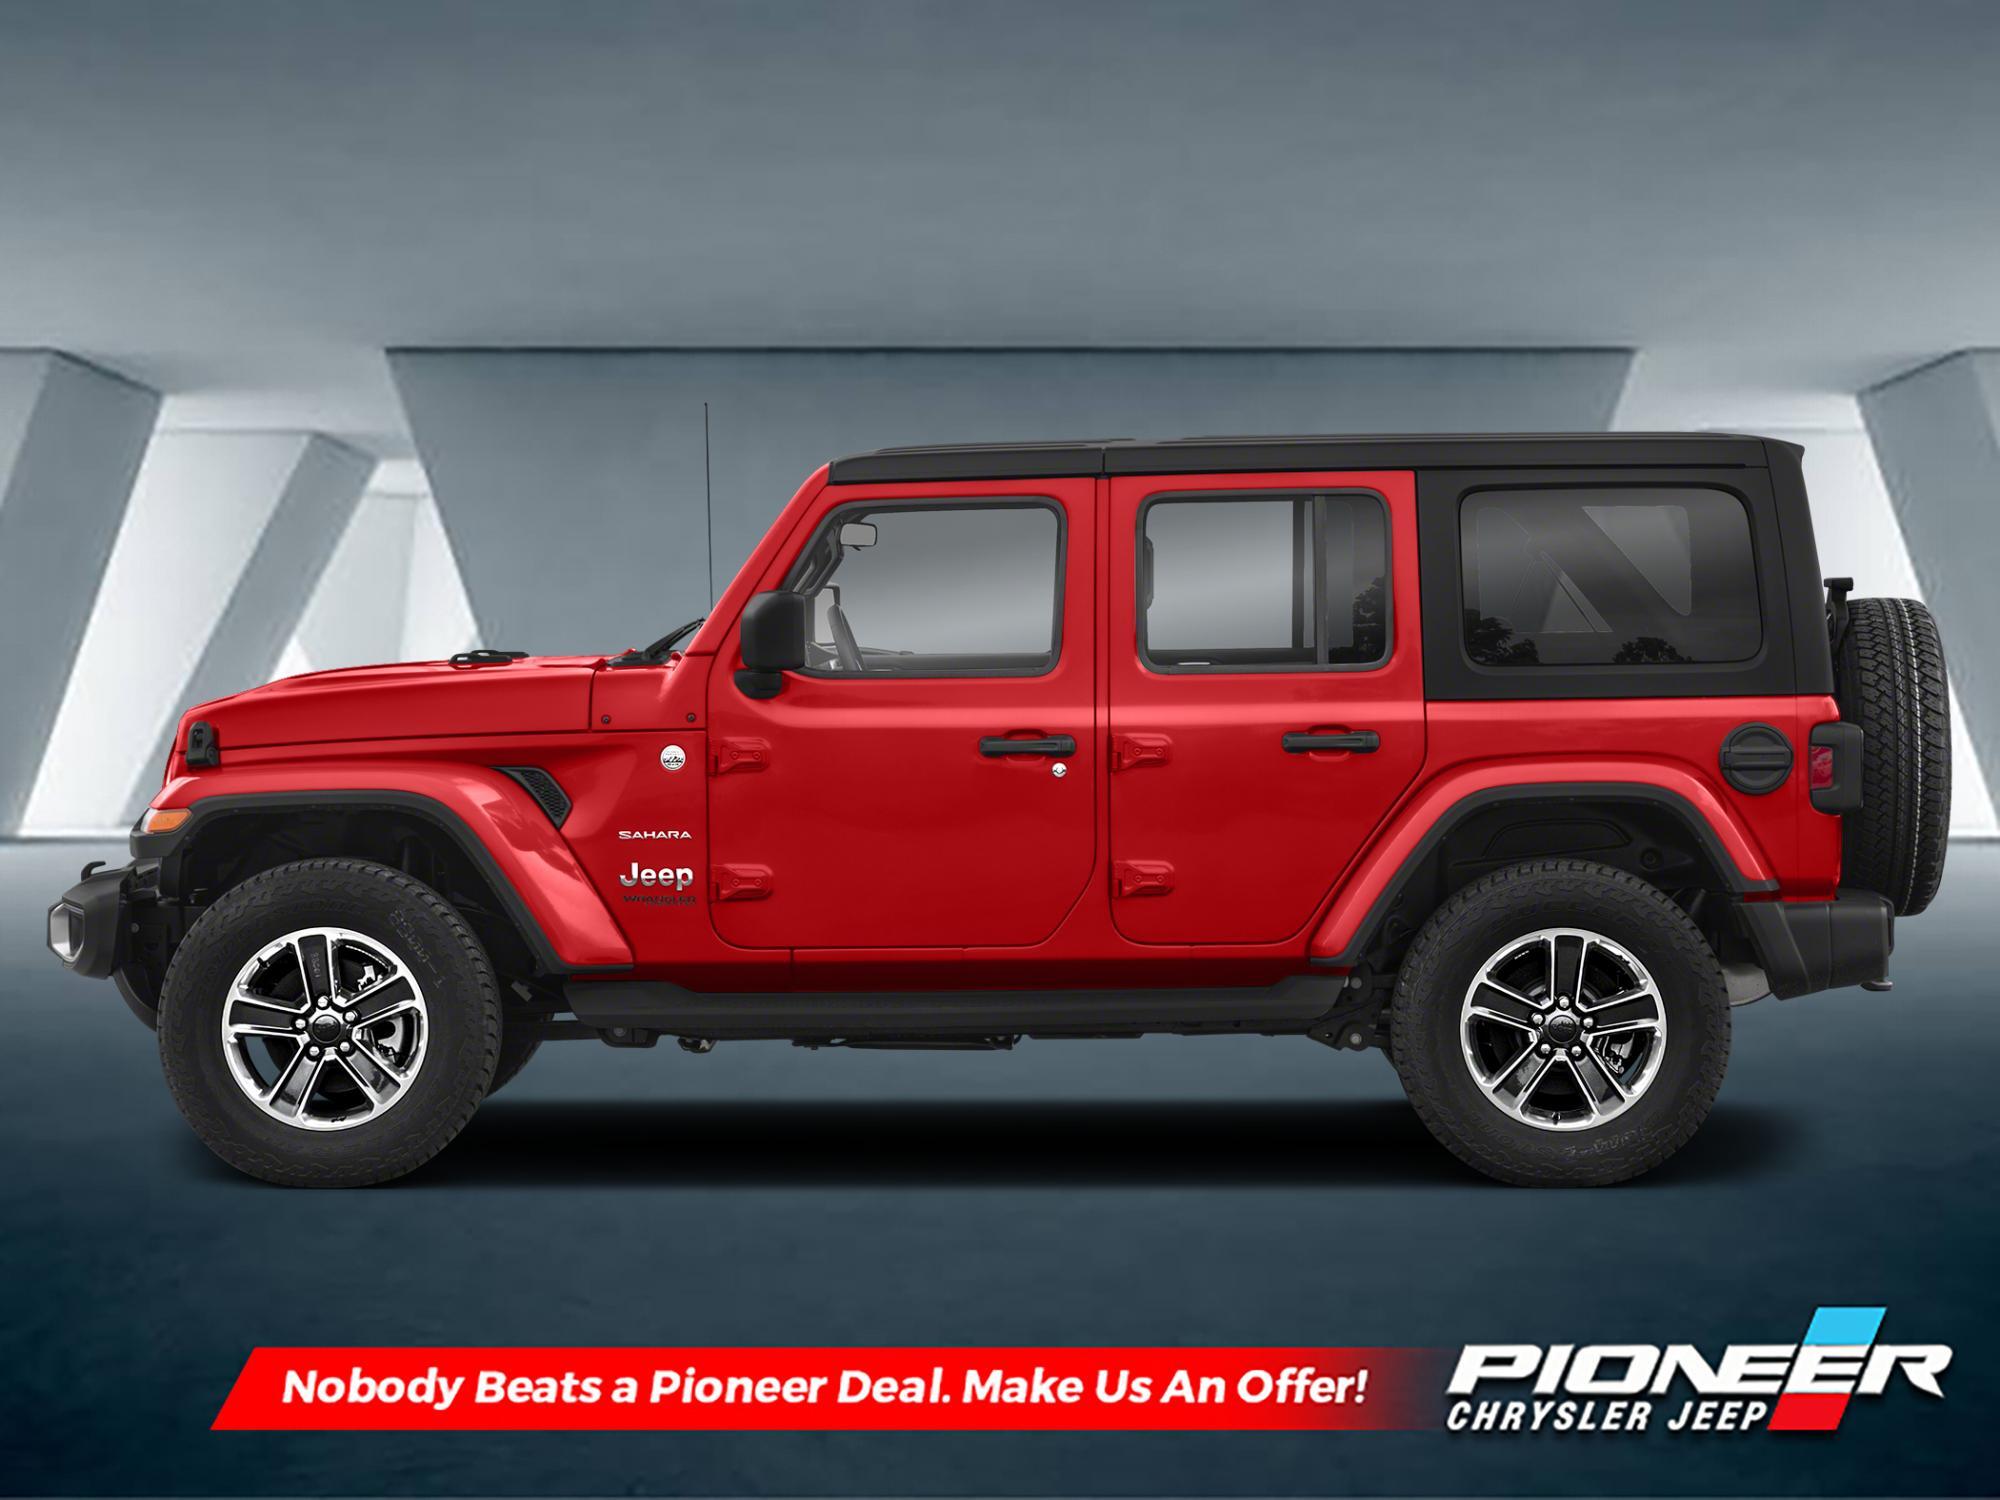 2021 Jeep Wrangler Sahara Unlimited   $10,000 OFF ROAD PACKAGE! -  4G